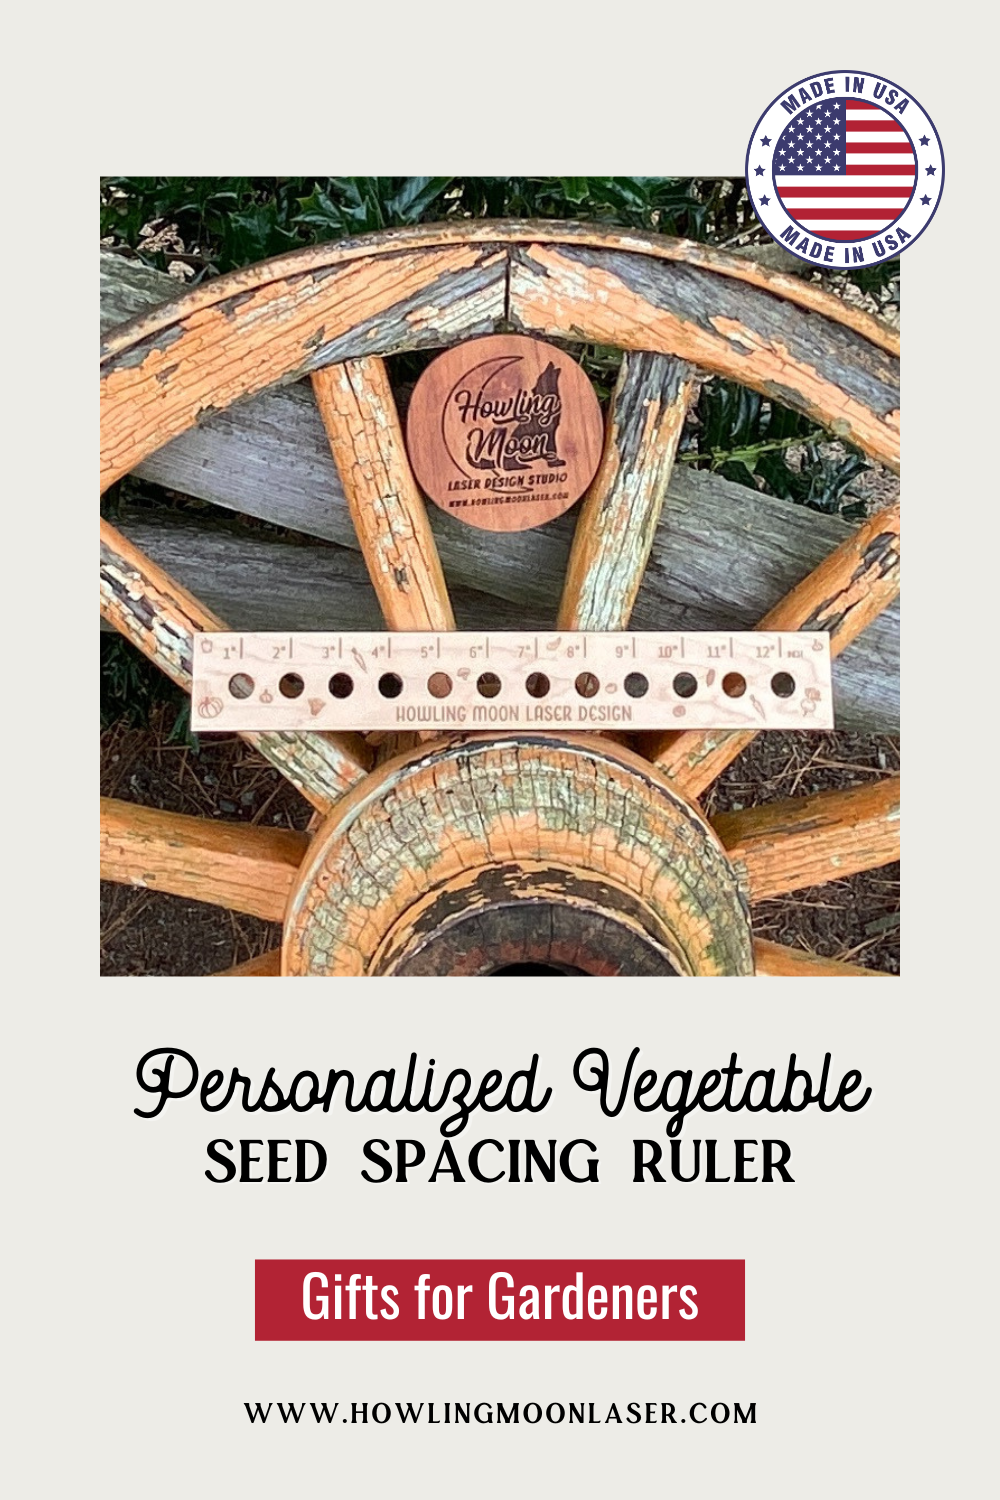 Personalized Vegetable Seed Spacing Ruler from Howling Moon Laser Design